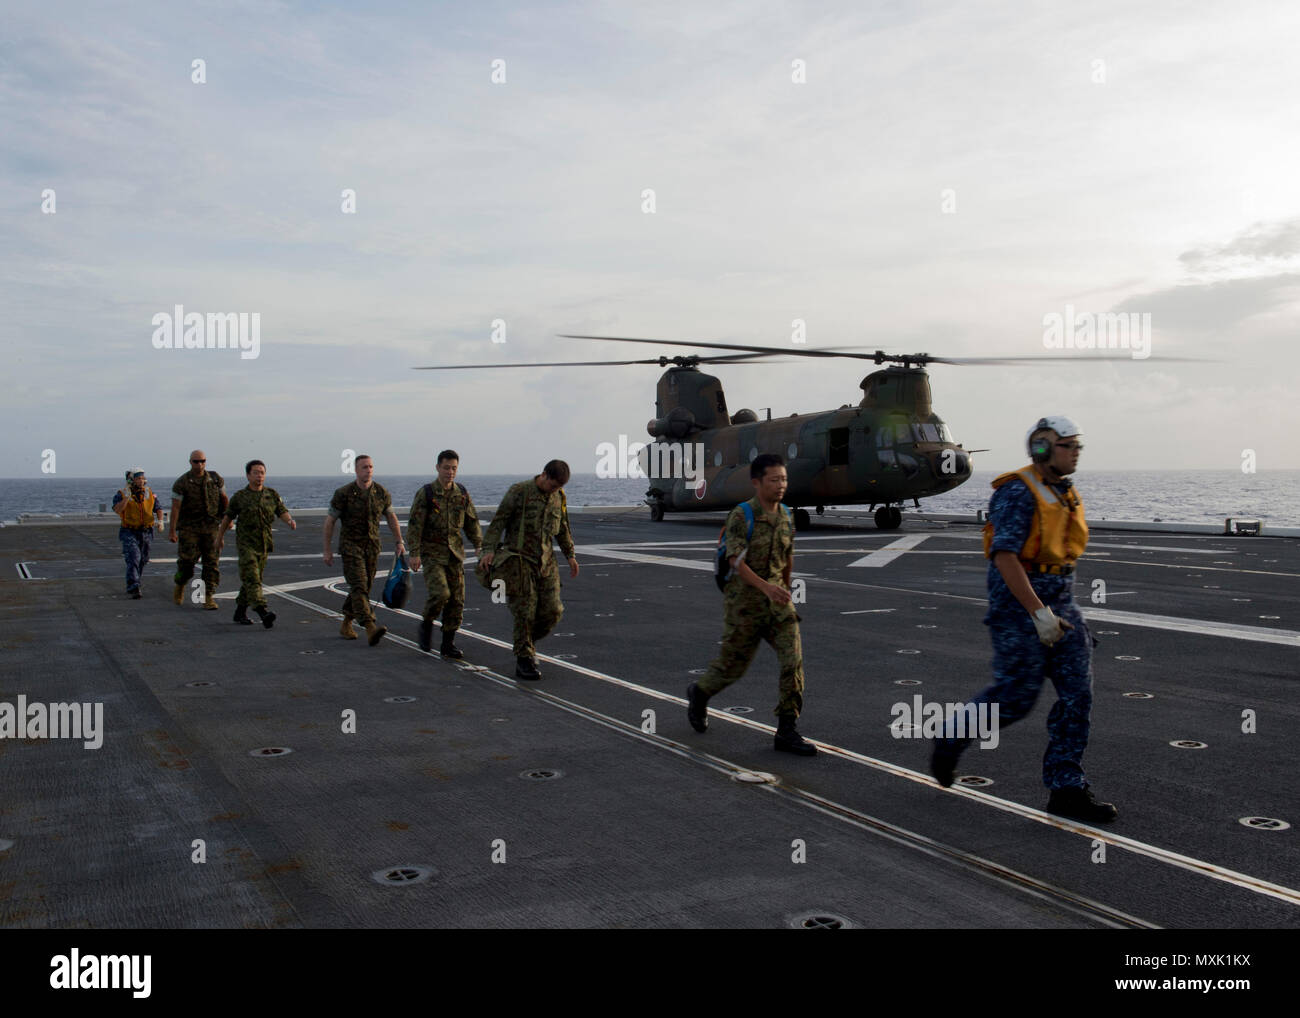 161107-N-ZK021-036  PACIFIC OCEAN (Nov. 7, 2016) U.S. and Japanese military personnel disembark CH-47 JA helicopter during exercise Keen Sword 2017. Keen Sword 17 is a joint and bilateral field training exercise (FTX) between U.S. and Japanese forces meant to increase readiness and interoperability within the framework of the U.S. – Japan alliance. (U.S. Navy photo by Petty Officer 1st Class Nardel Gervacio/Released) Stock Photo